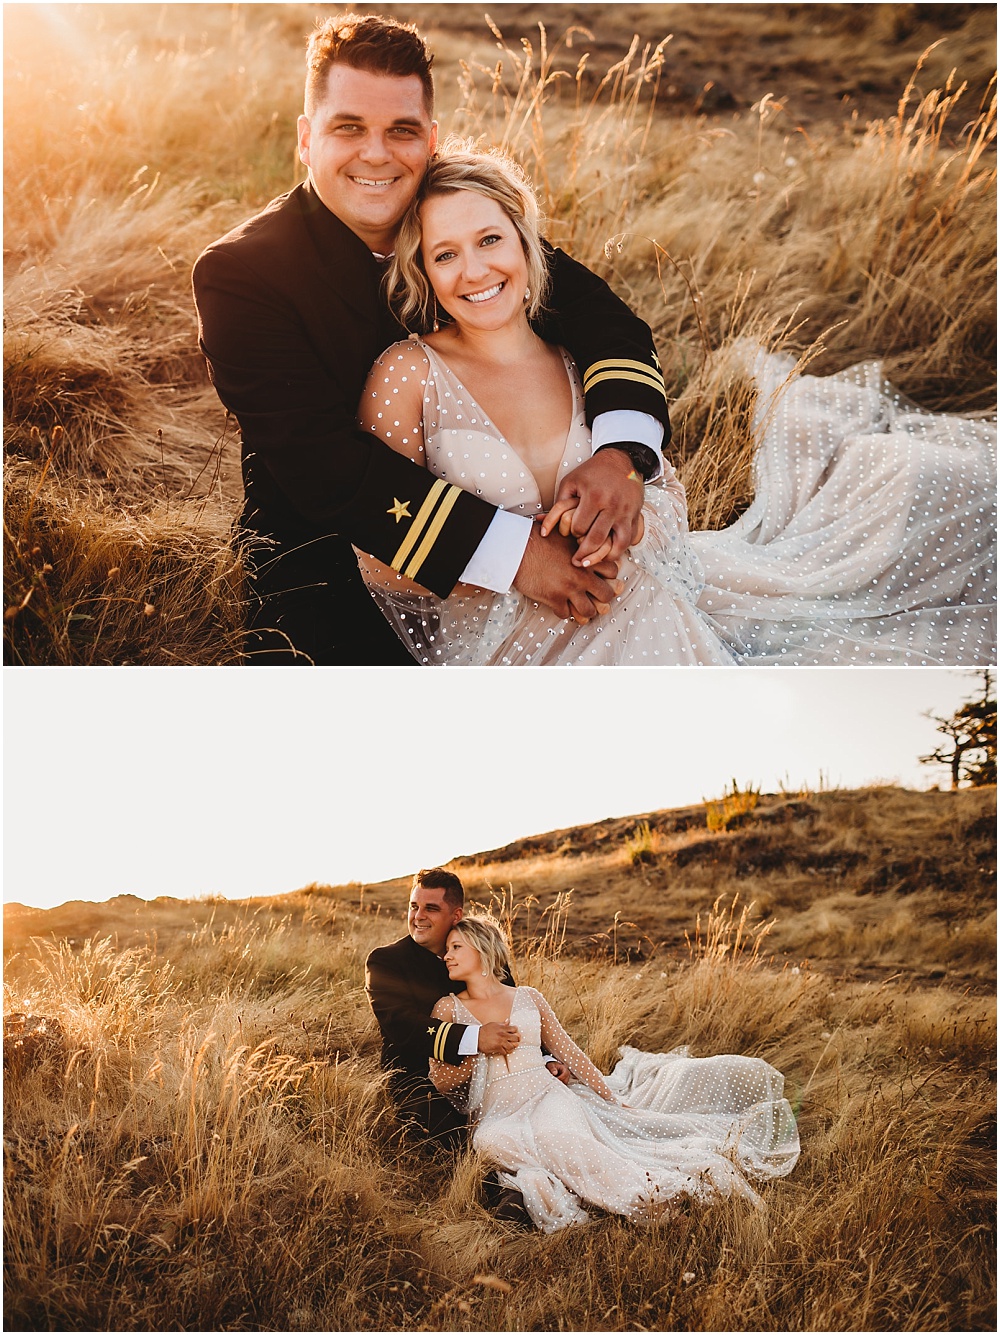 Bride and groom portraits